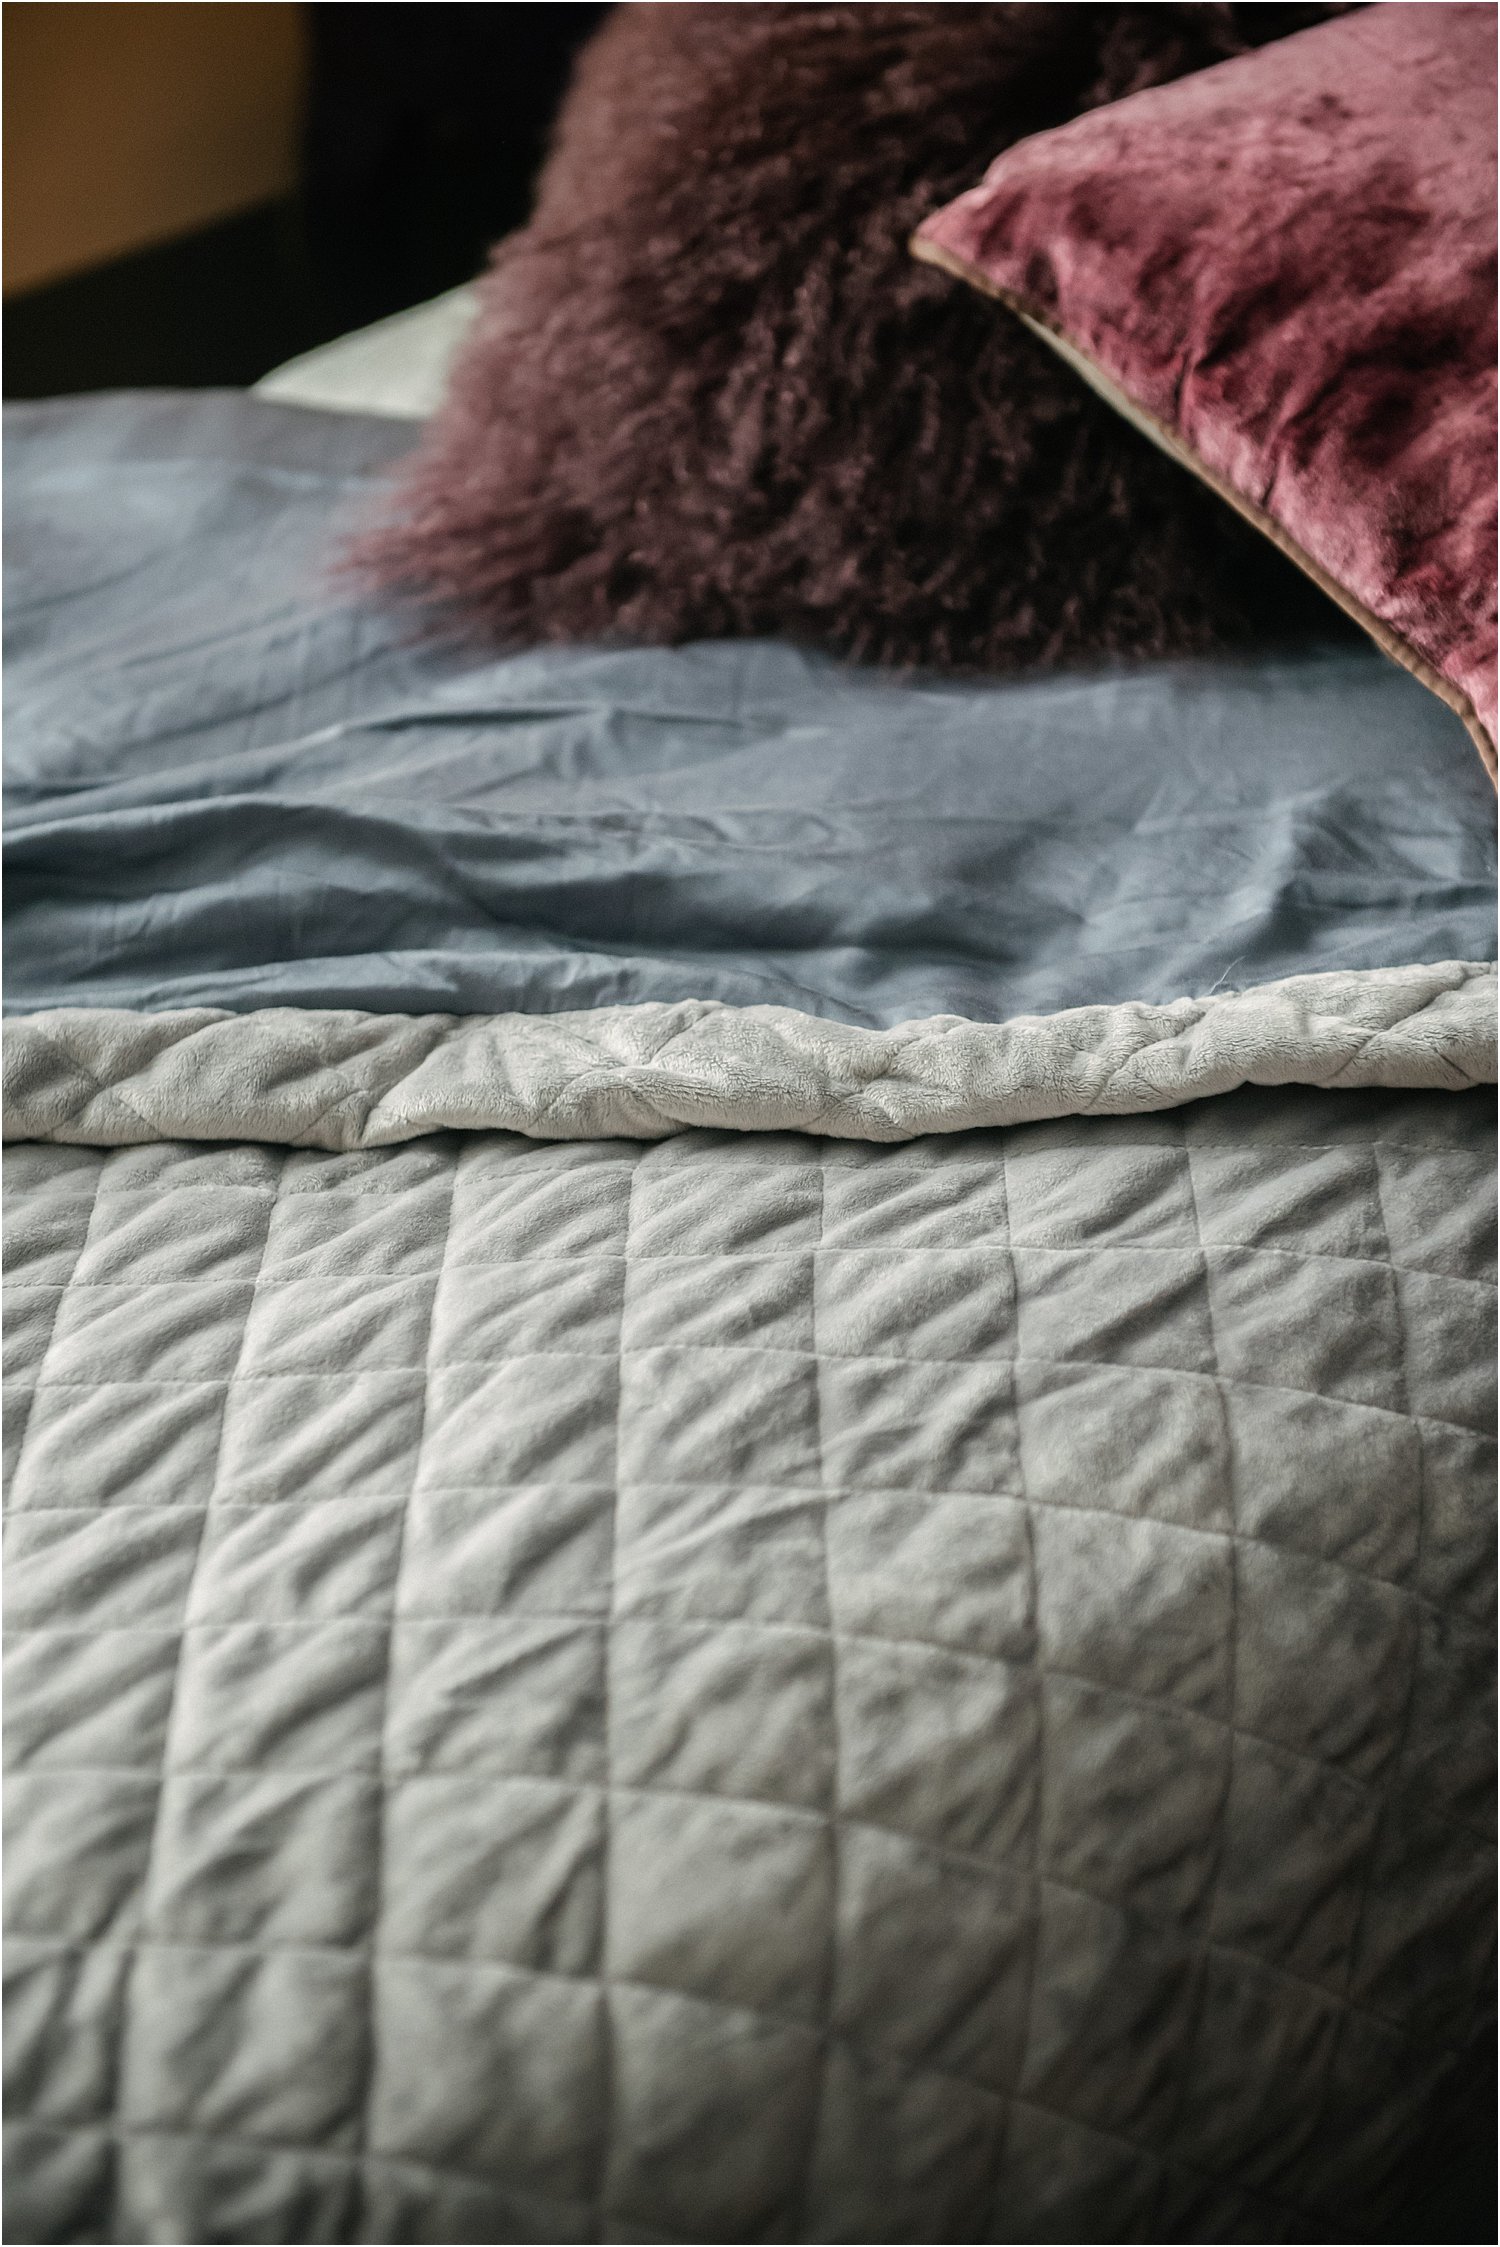 product-review-Kalm-Koala-weighted-blanket-duvet